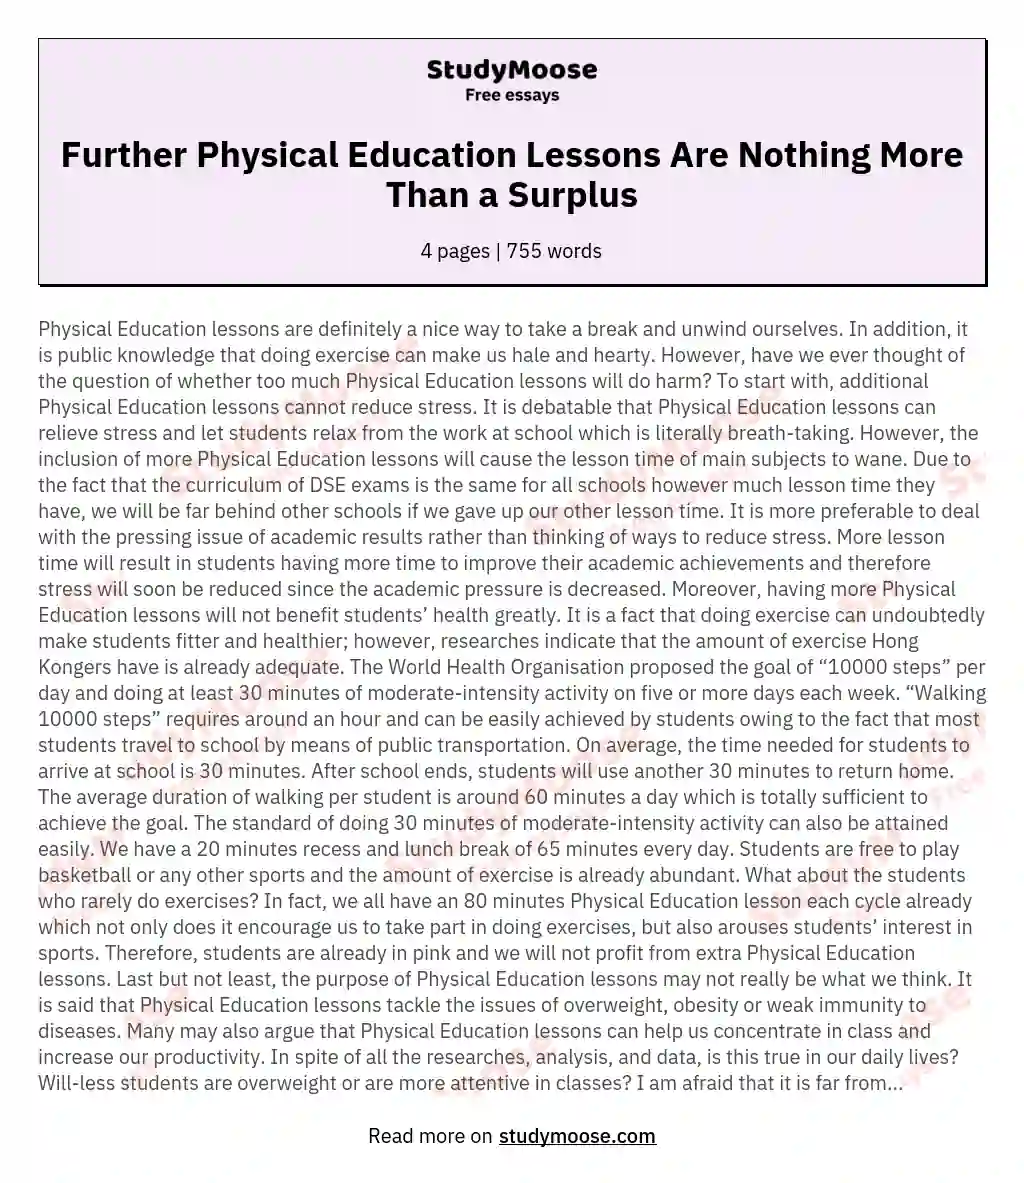 Further Physical Education Lessons Are Nothing More Than a Surplus essay